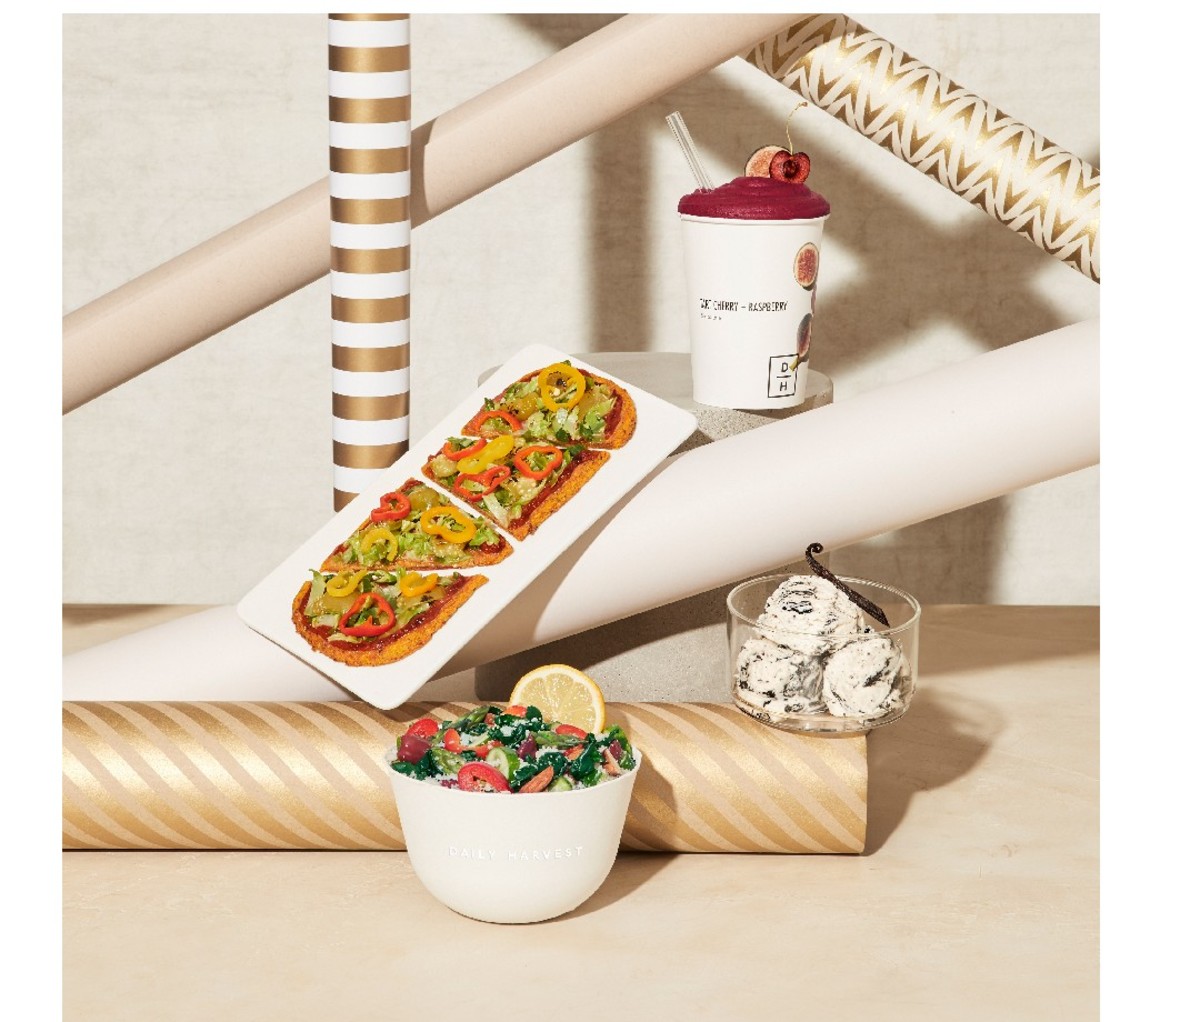 Flat bread, salad and ice cream selection for Daily Harvest Custom Gift Box displayed with rolls of wrapping paper.